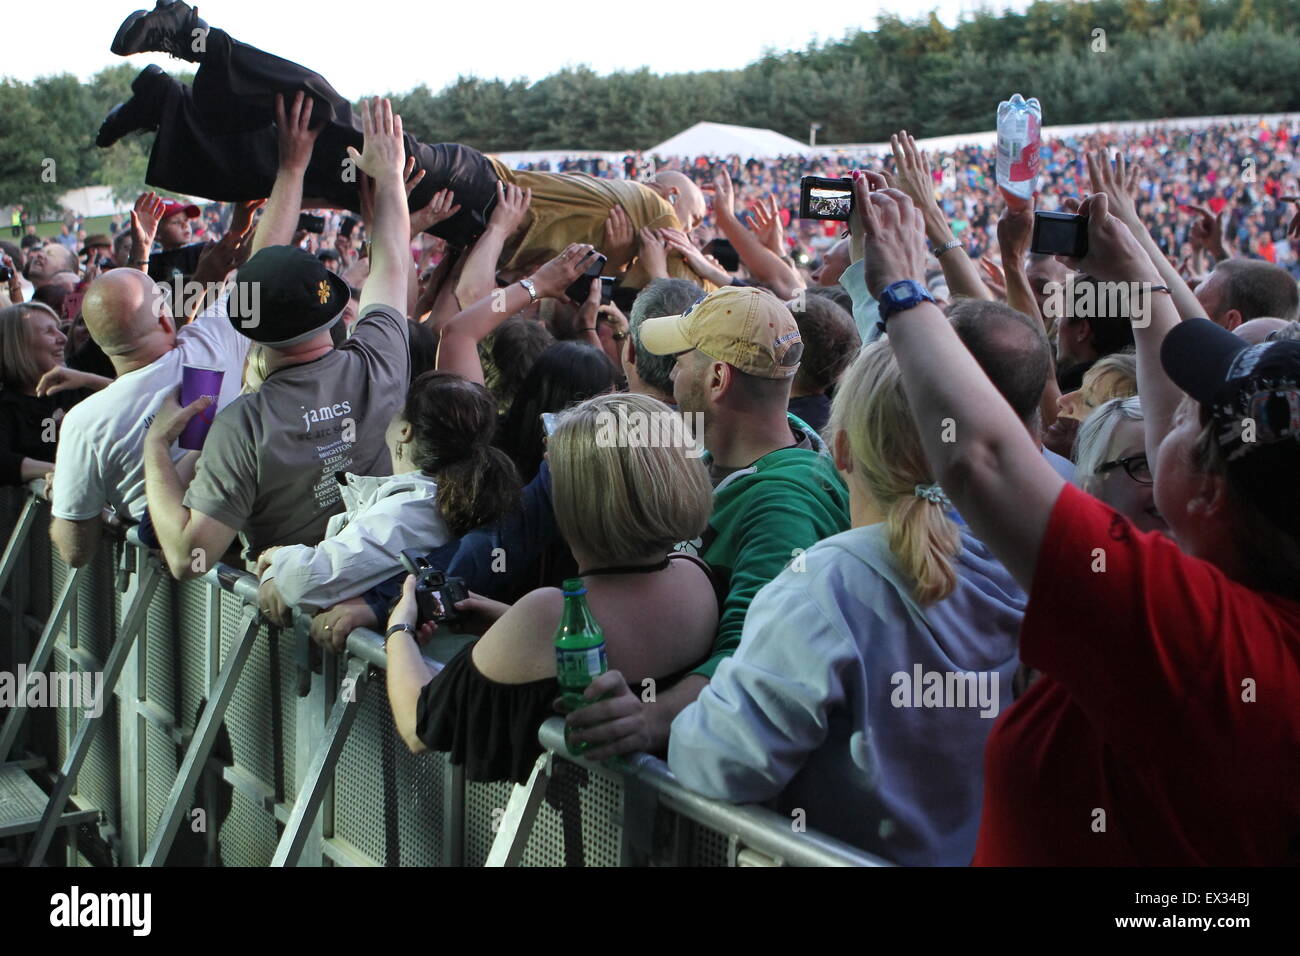 Delamere, UK. 5th July, 2015. Manchester band James performs live at Delamere Forest. Singer Tim Booth dives into the crowd during a song. Credit:  Simon Newbury/Alamy Live News Stock Photo